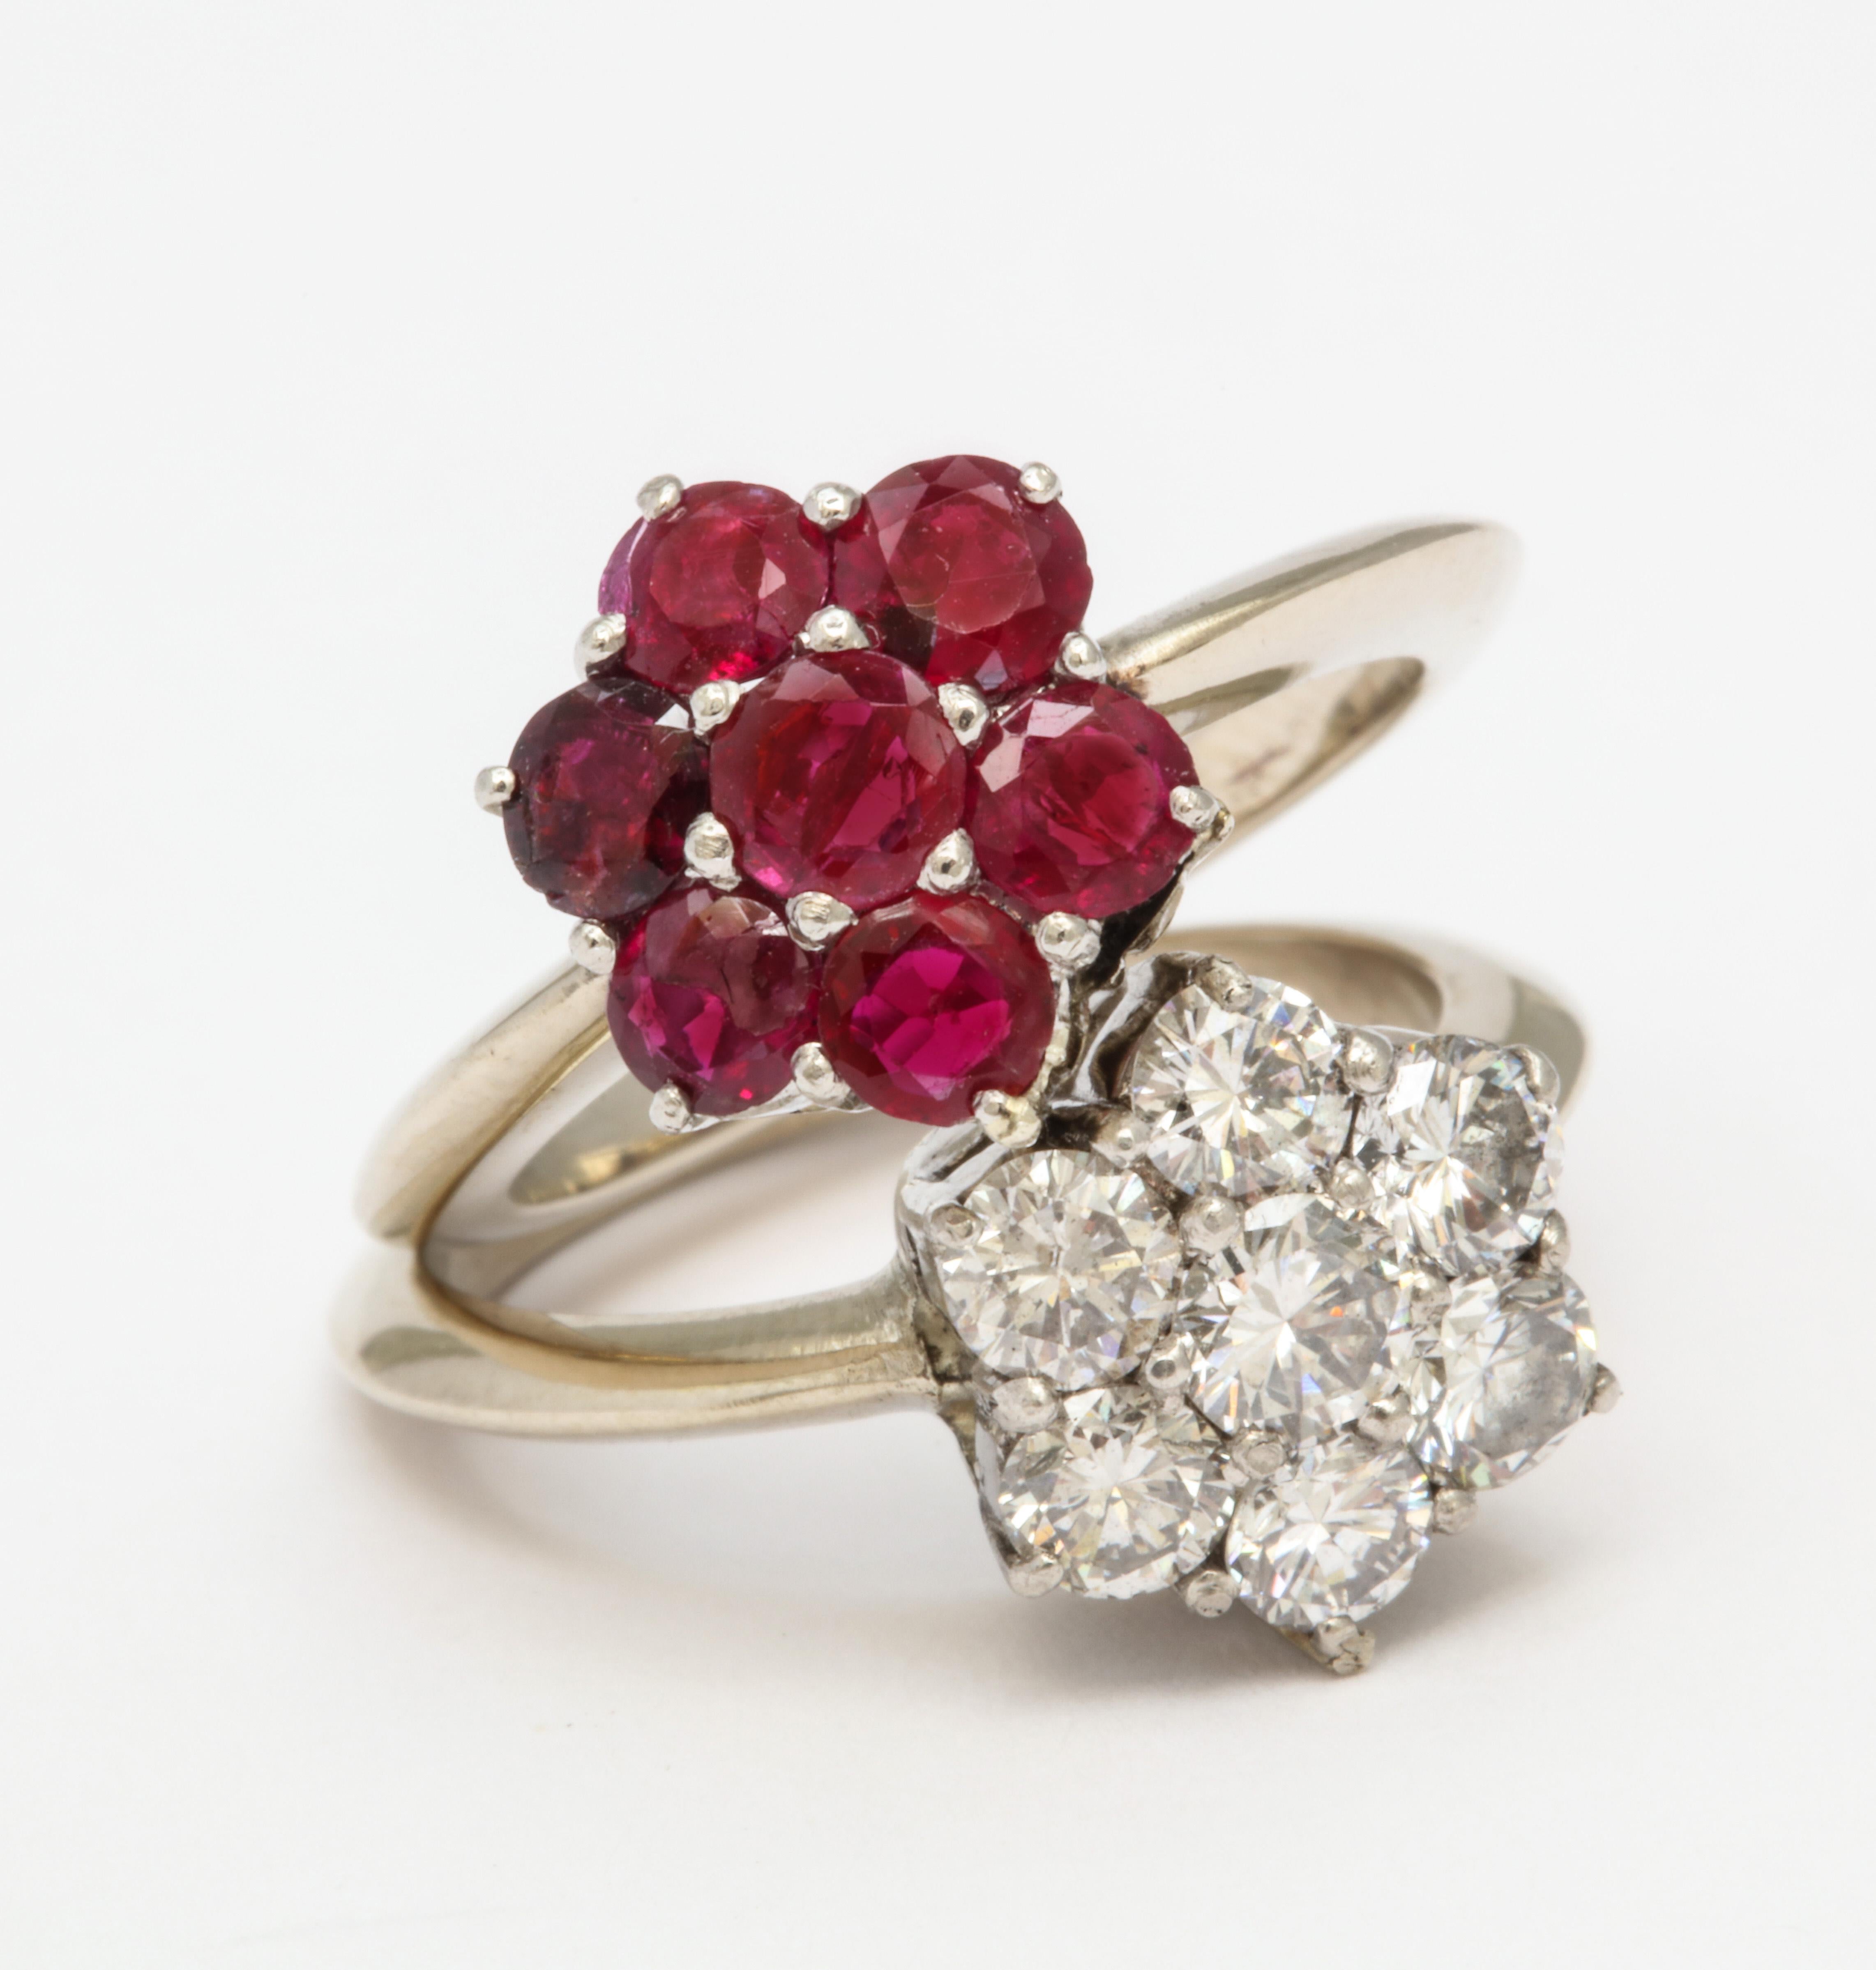 A beautiful group of 6 rubies surrounding a center stone set in 18 kt gold 